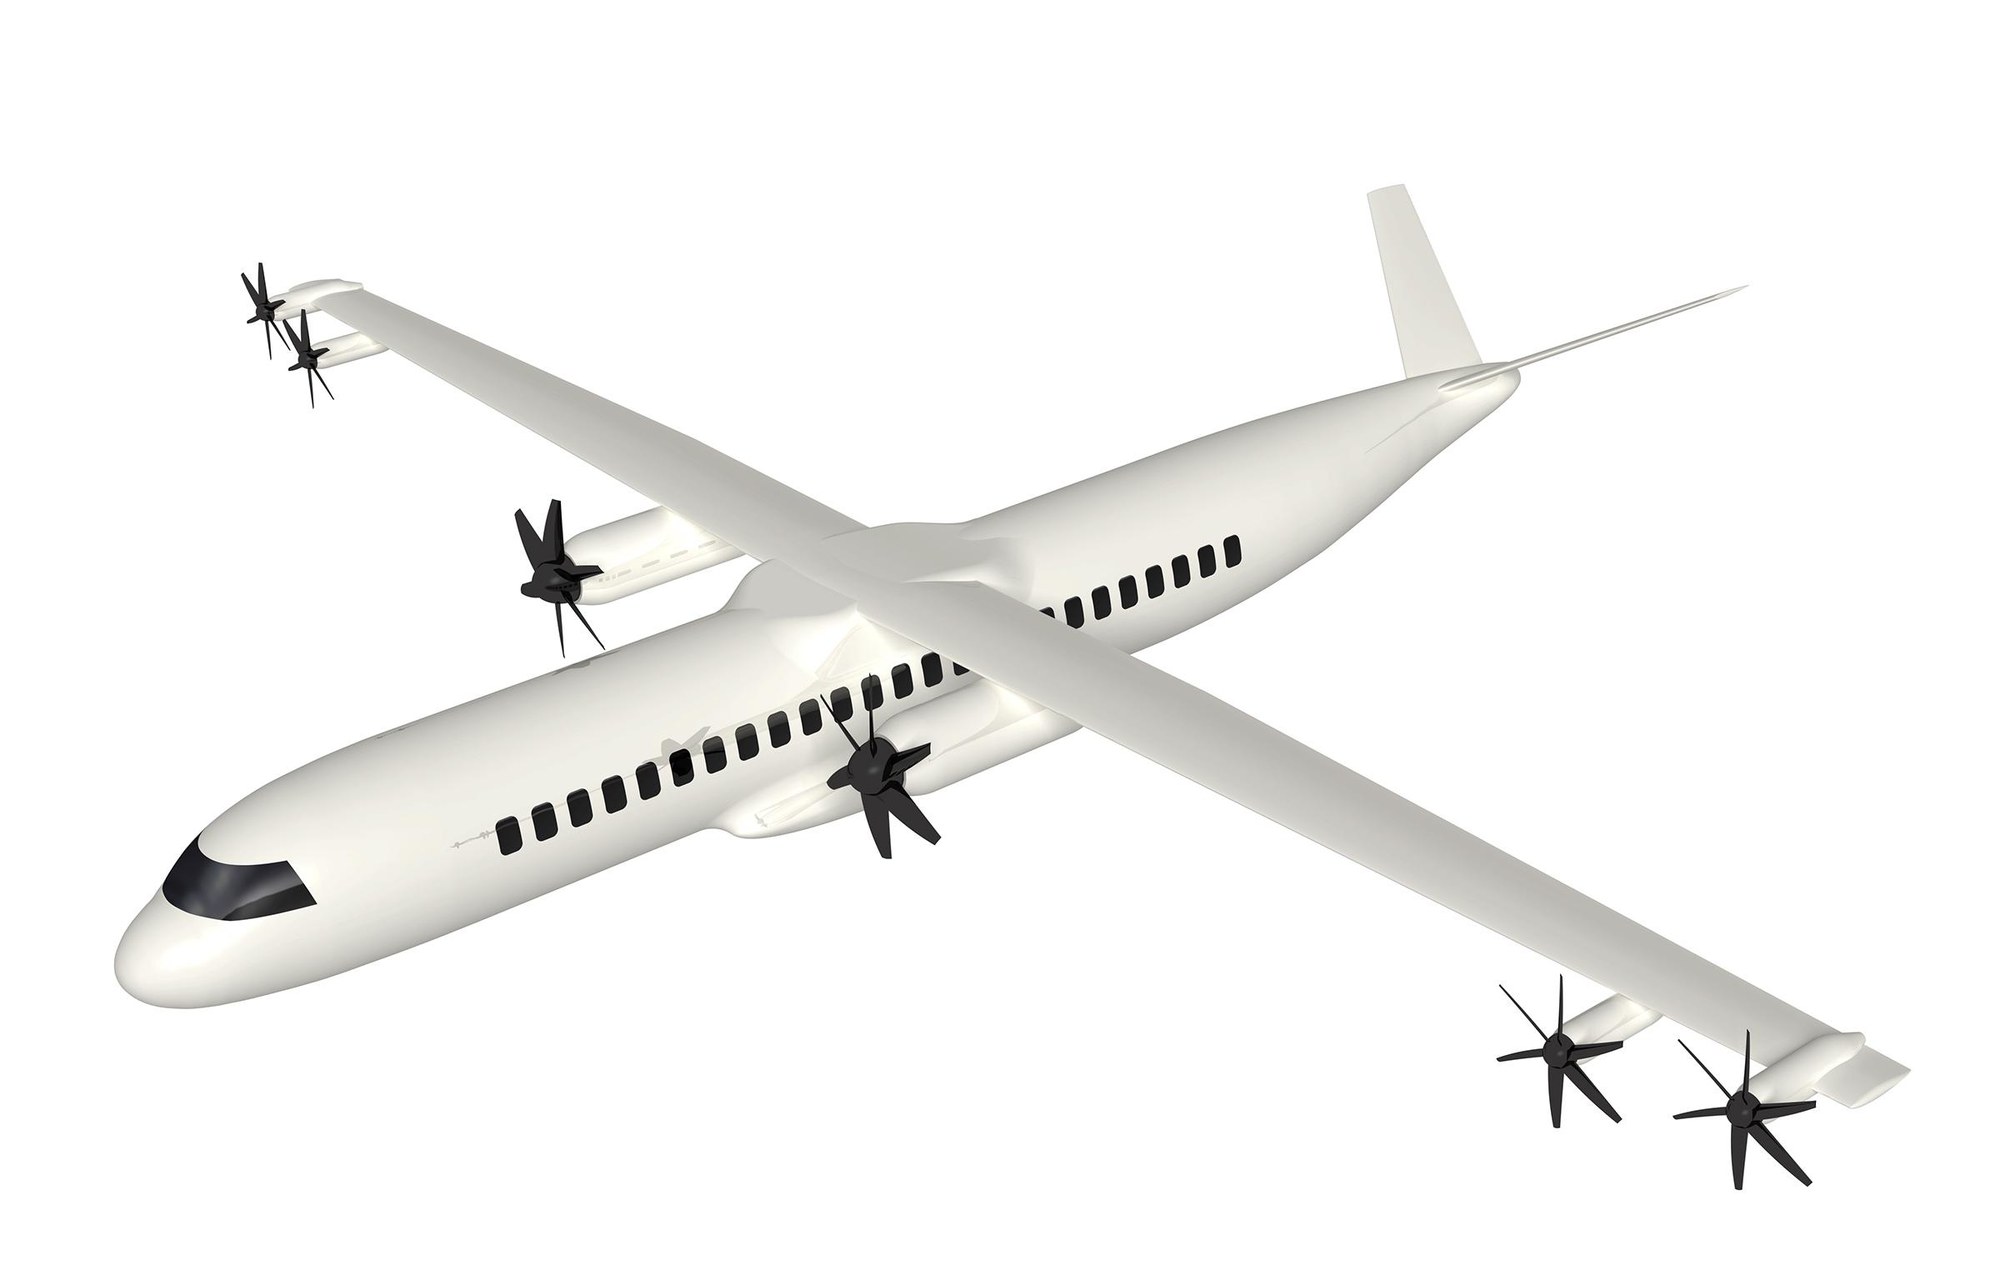 Regional aircraft with additional e-propellers near the wingtips